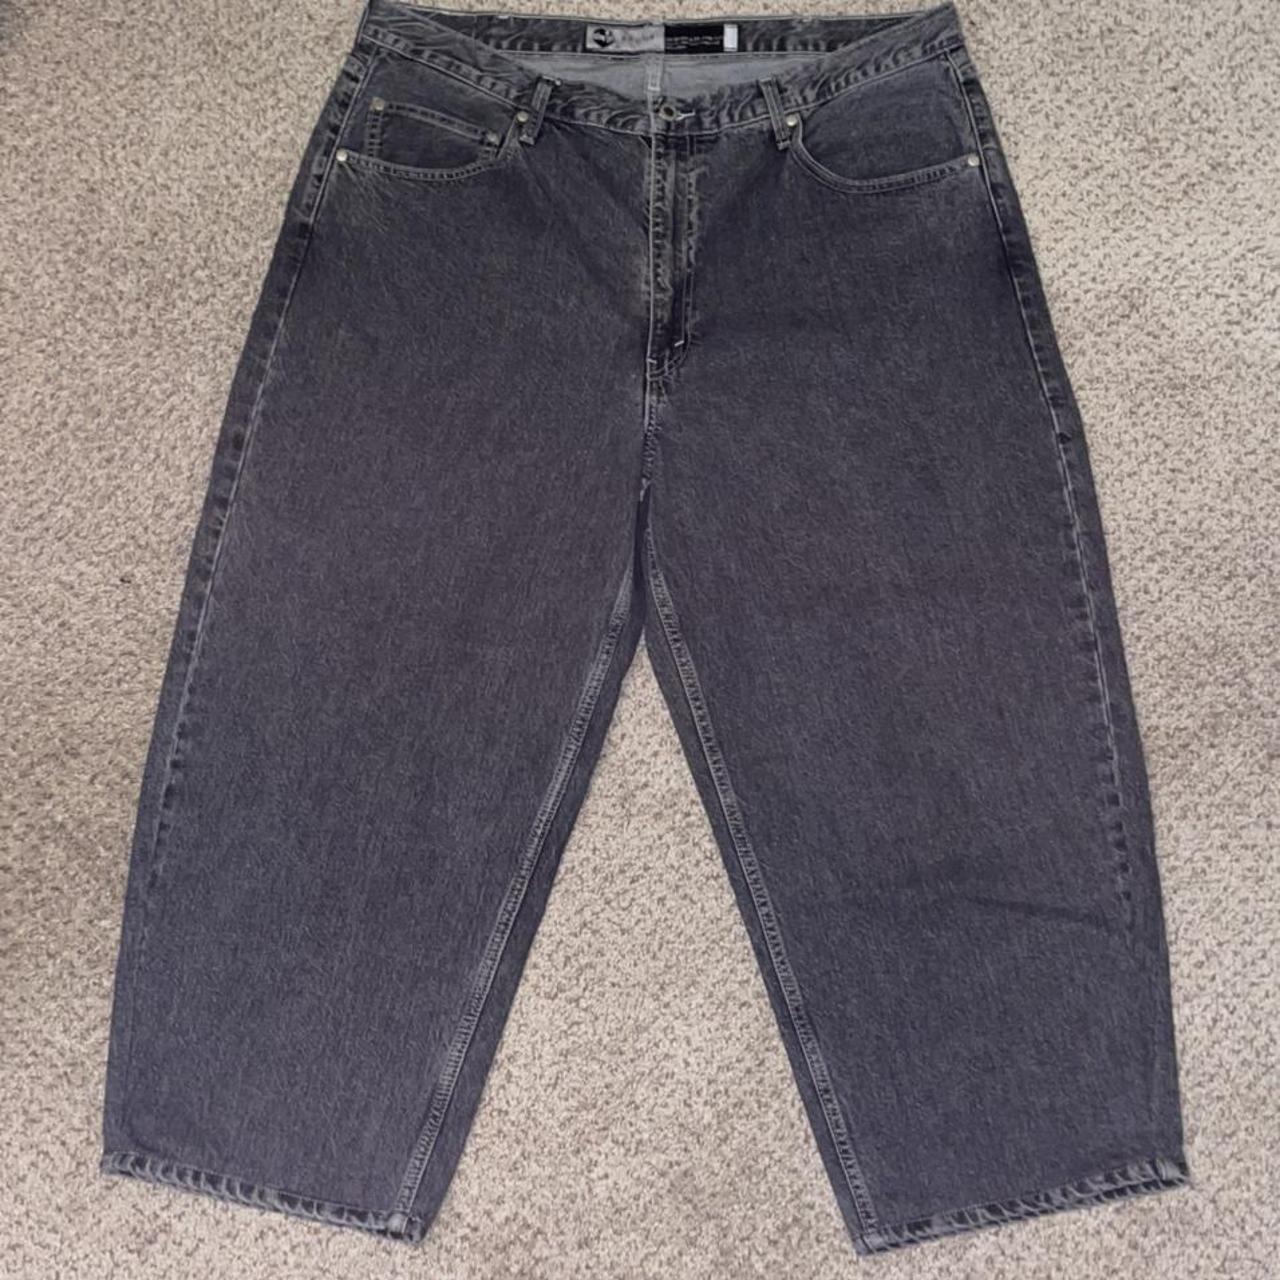 Product Image 1 - -Levi’s Silvertab “baggy” jeans from